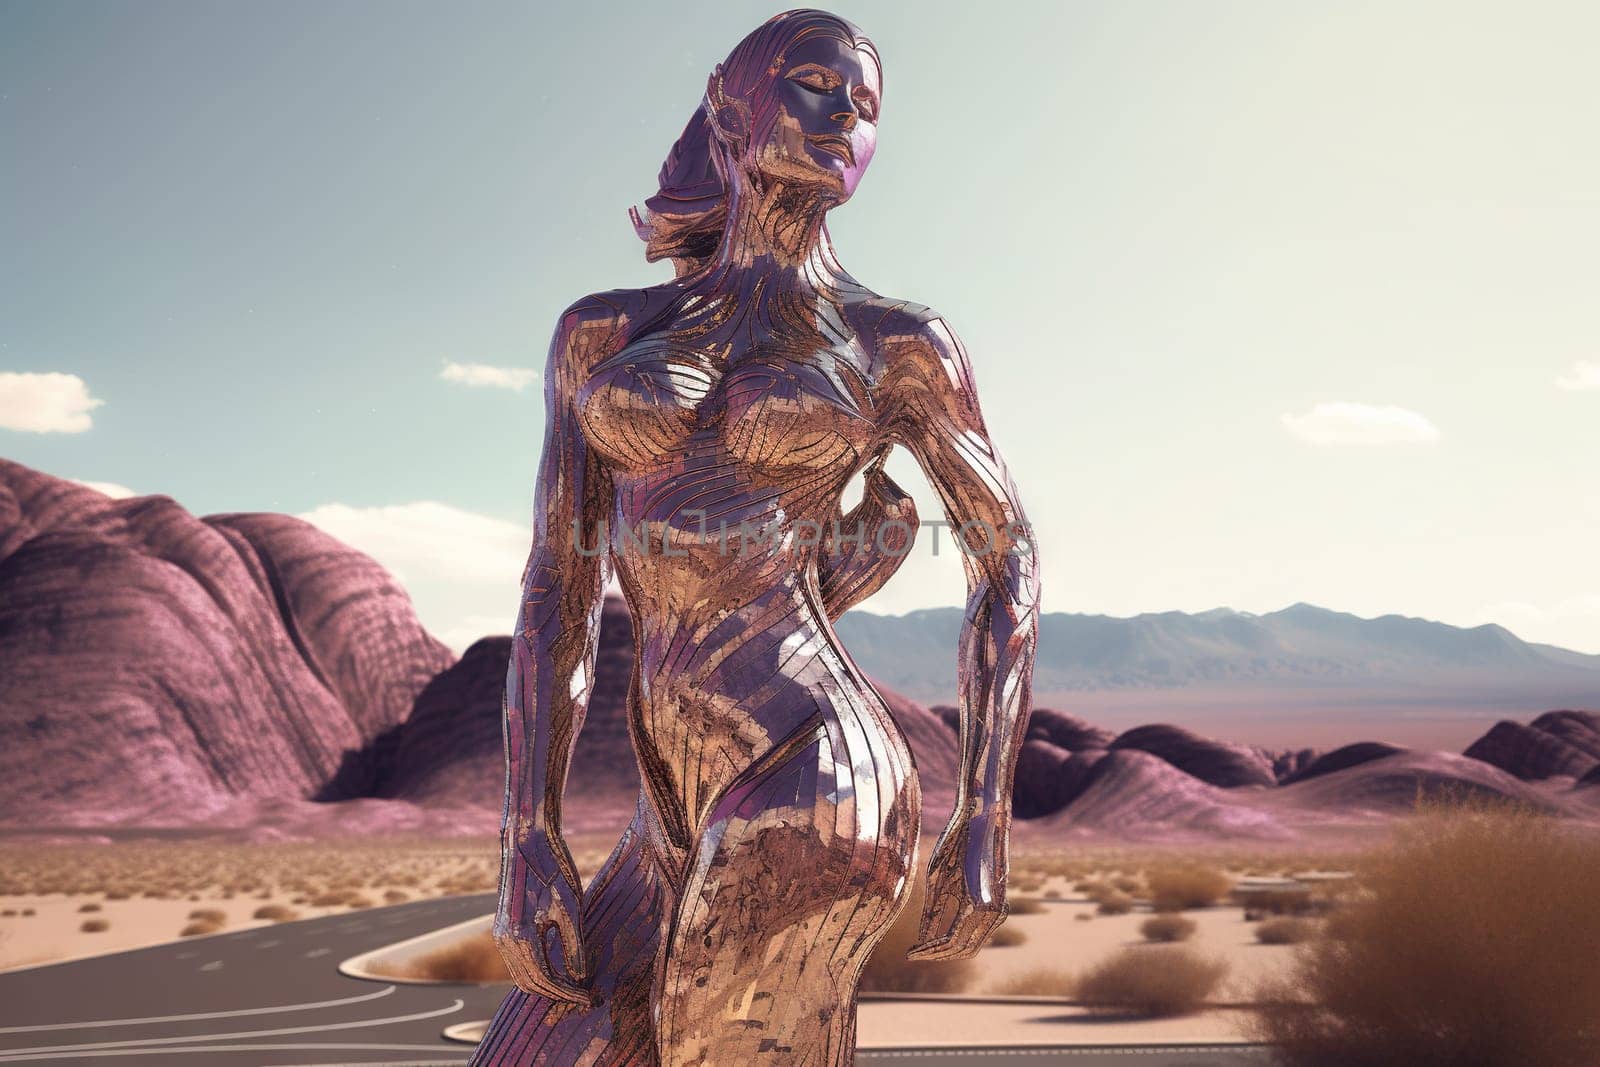 Crome robot woman portrait in the city. Artificial intelligence rise and shiny. Mechanical beauty. Generated AI